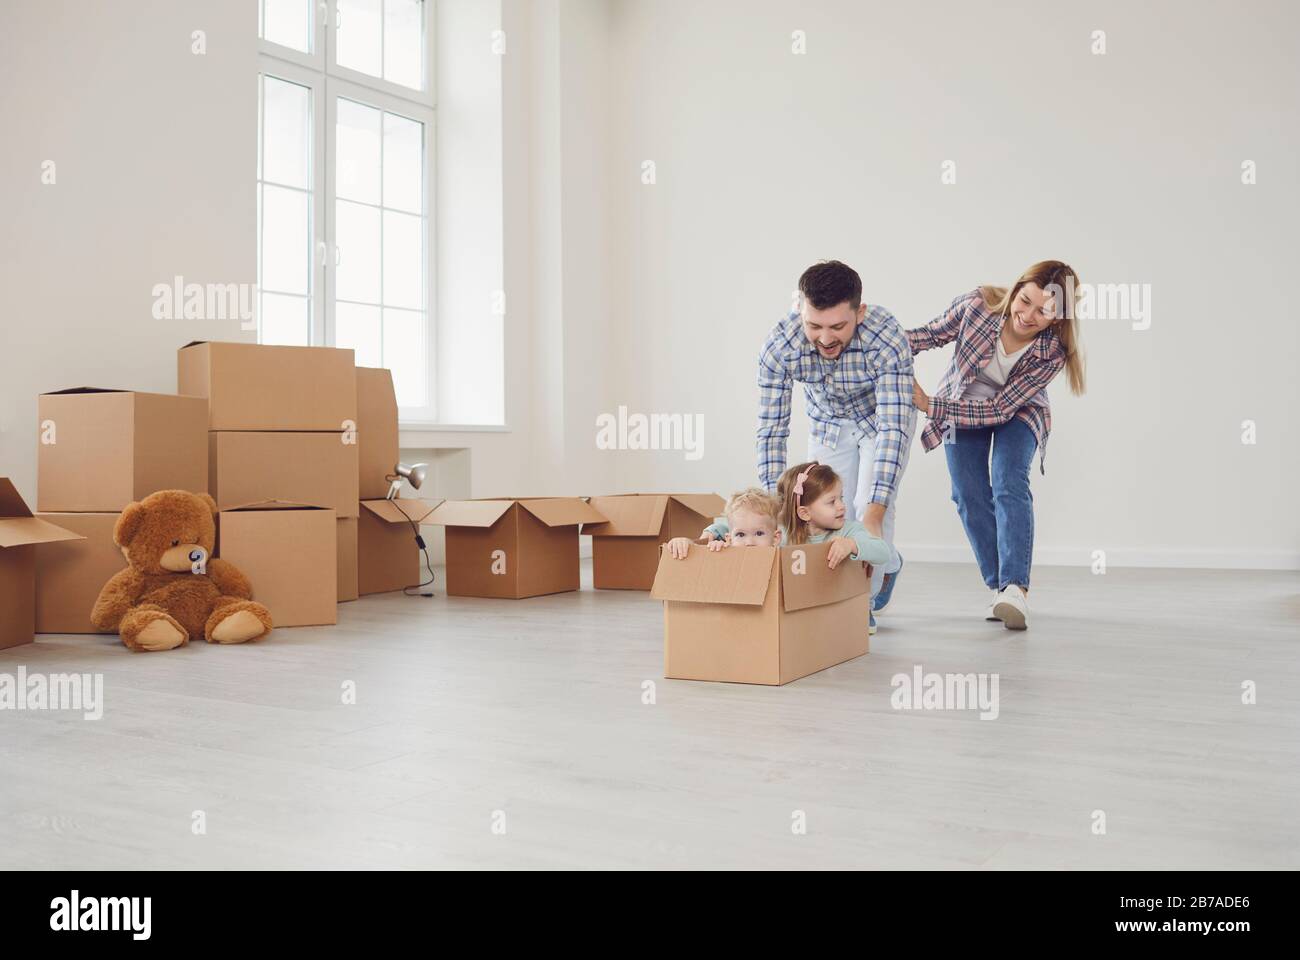 Happy family have fun playing in a new house in the room. Stock Photo